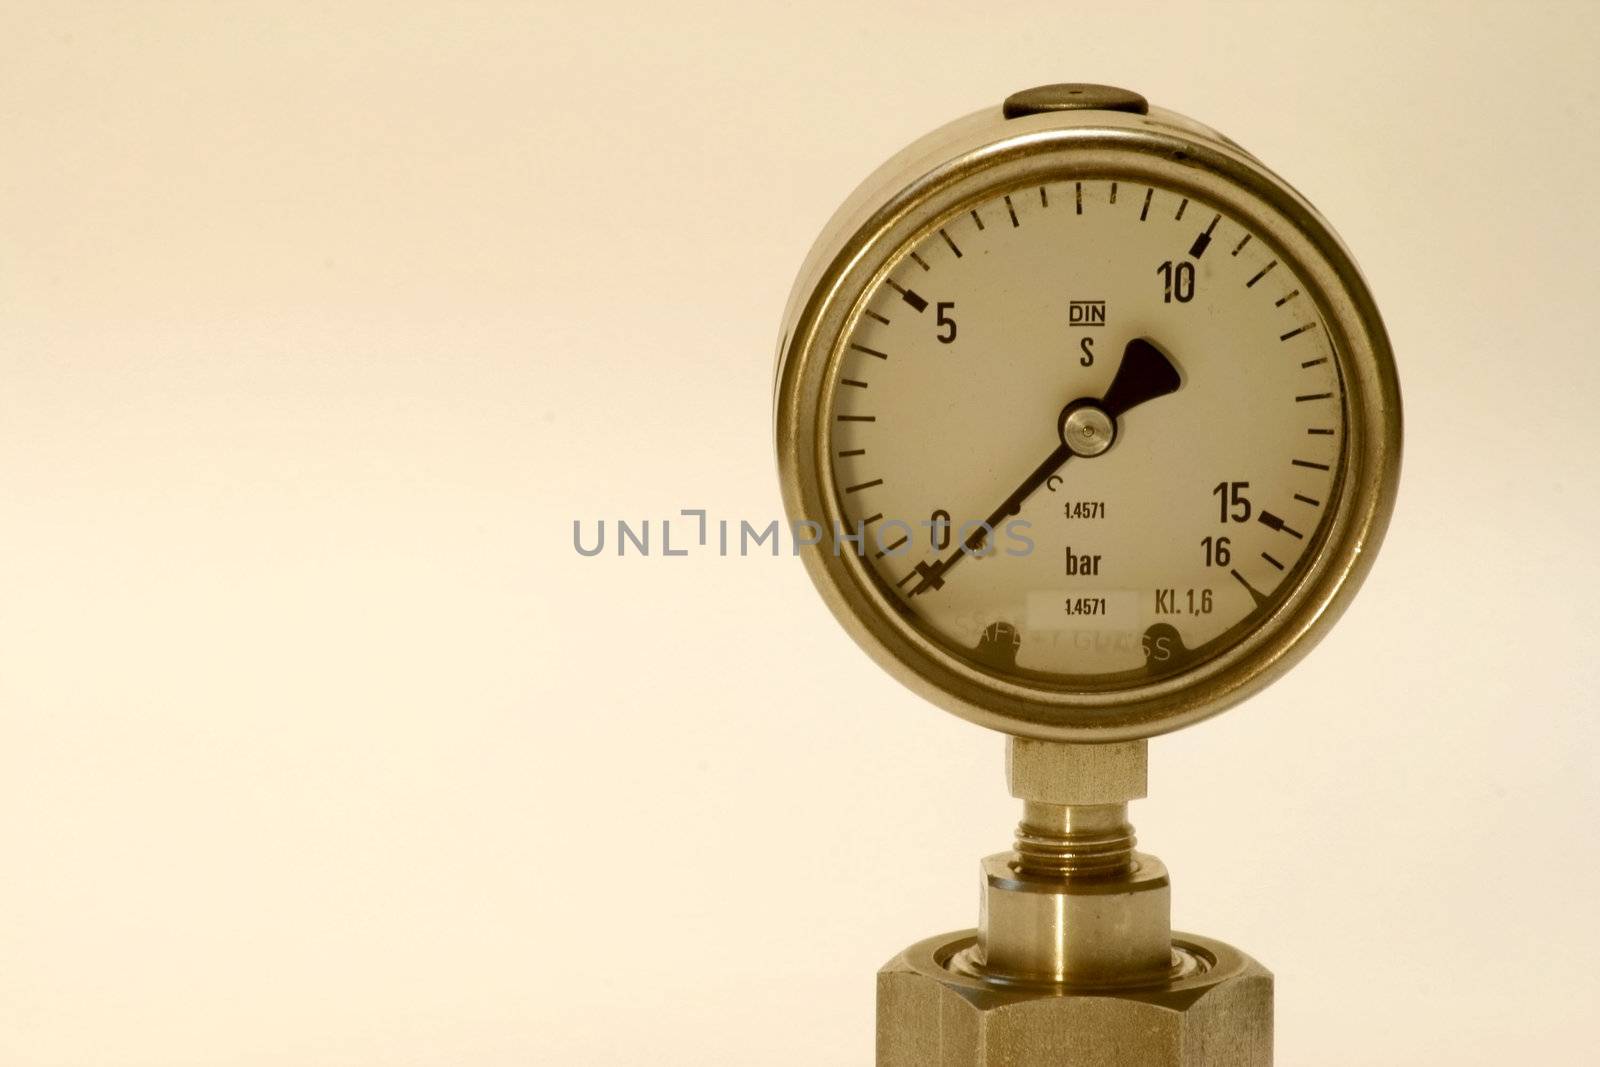 Mechanical Pressure Gauge used in hydrotest of vessel in DIN and SI units